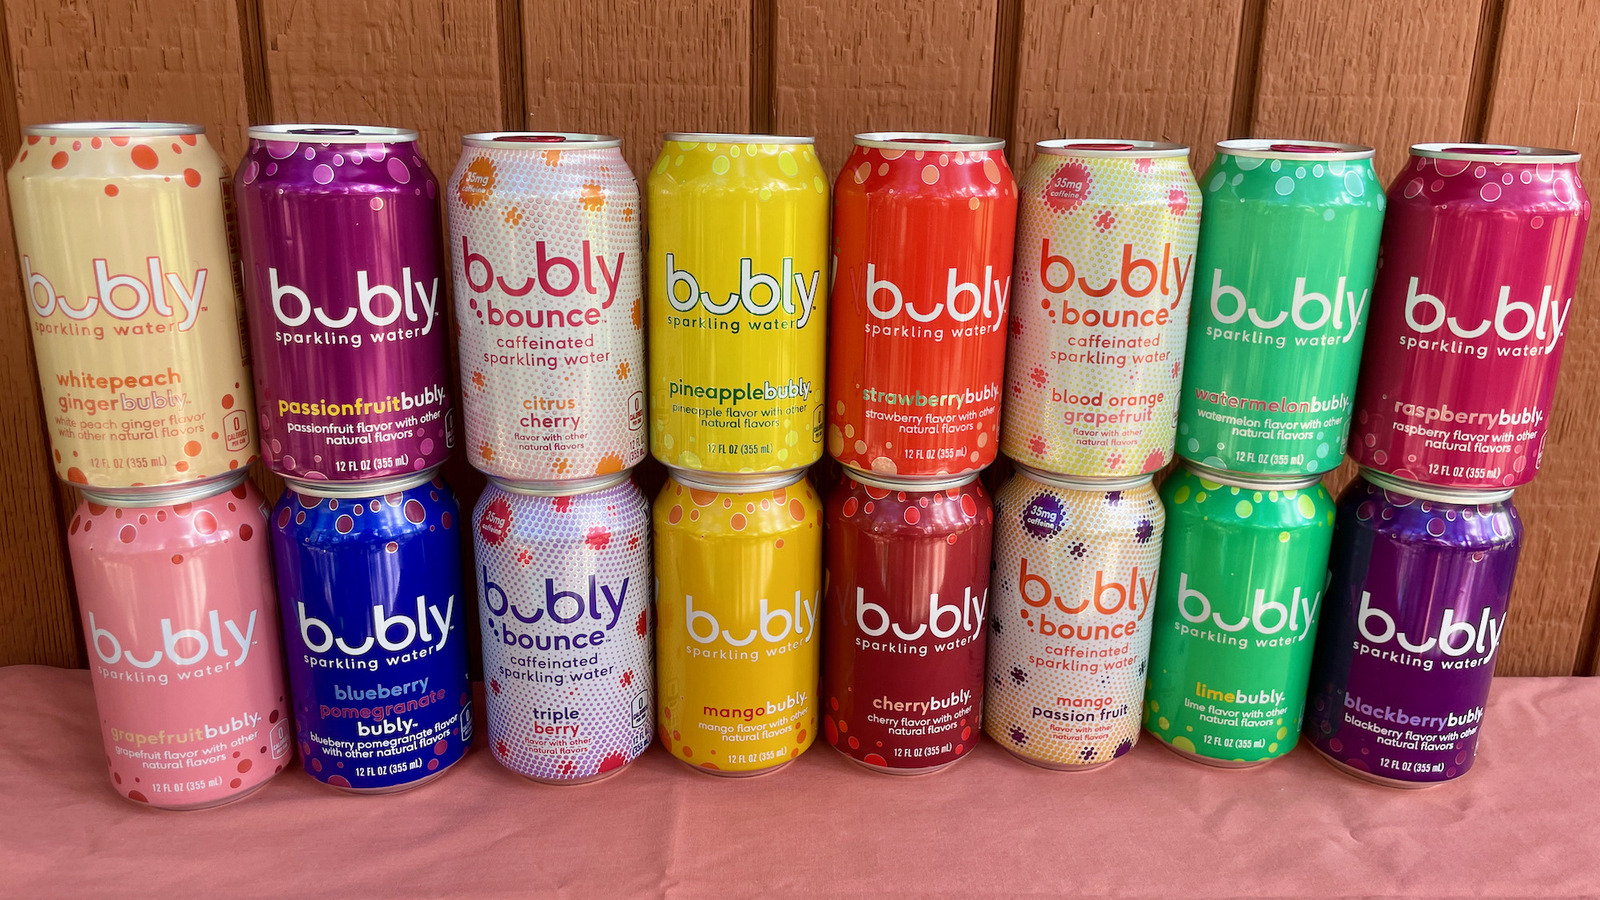 Why Are Some Drinks Bubbly?